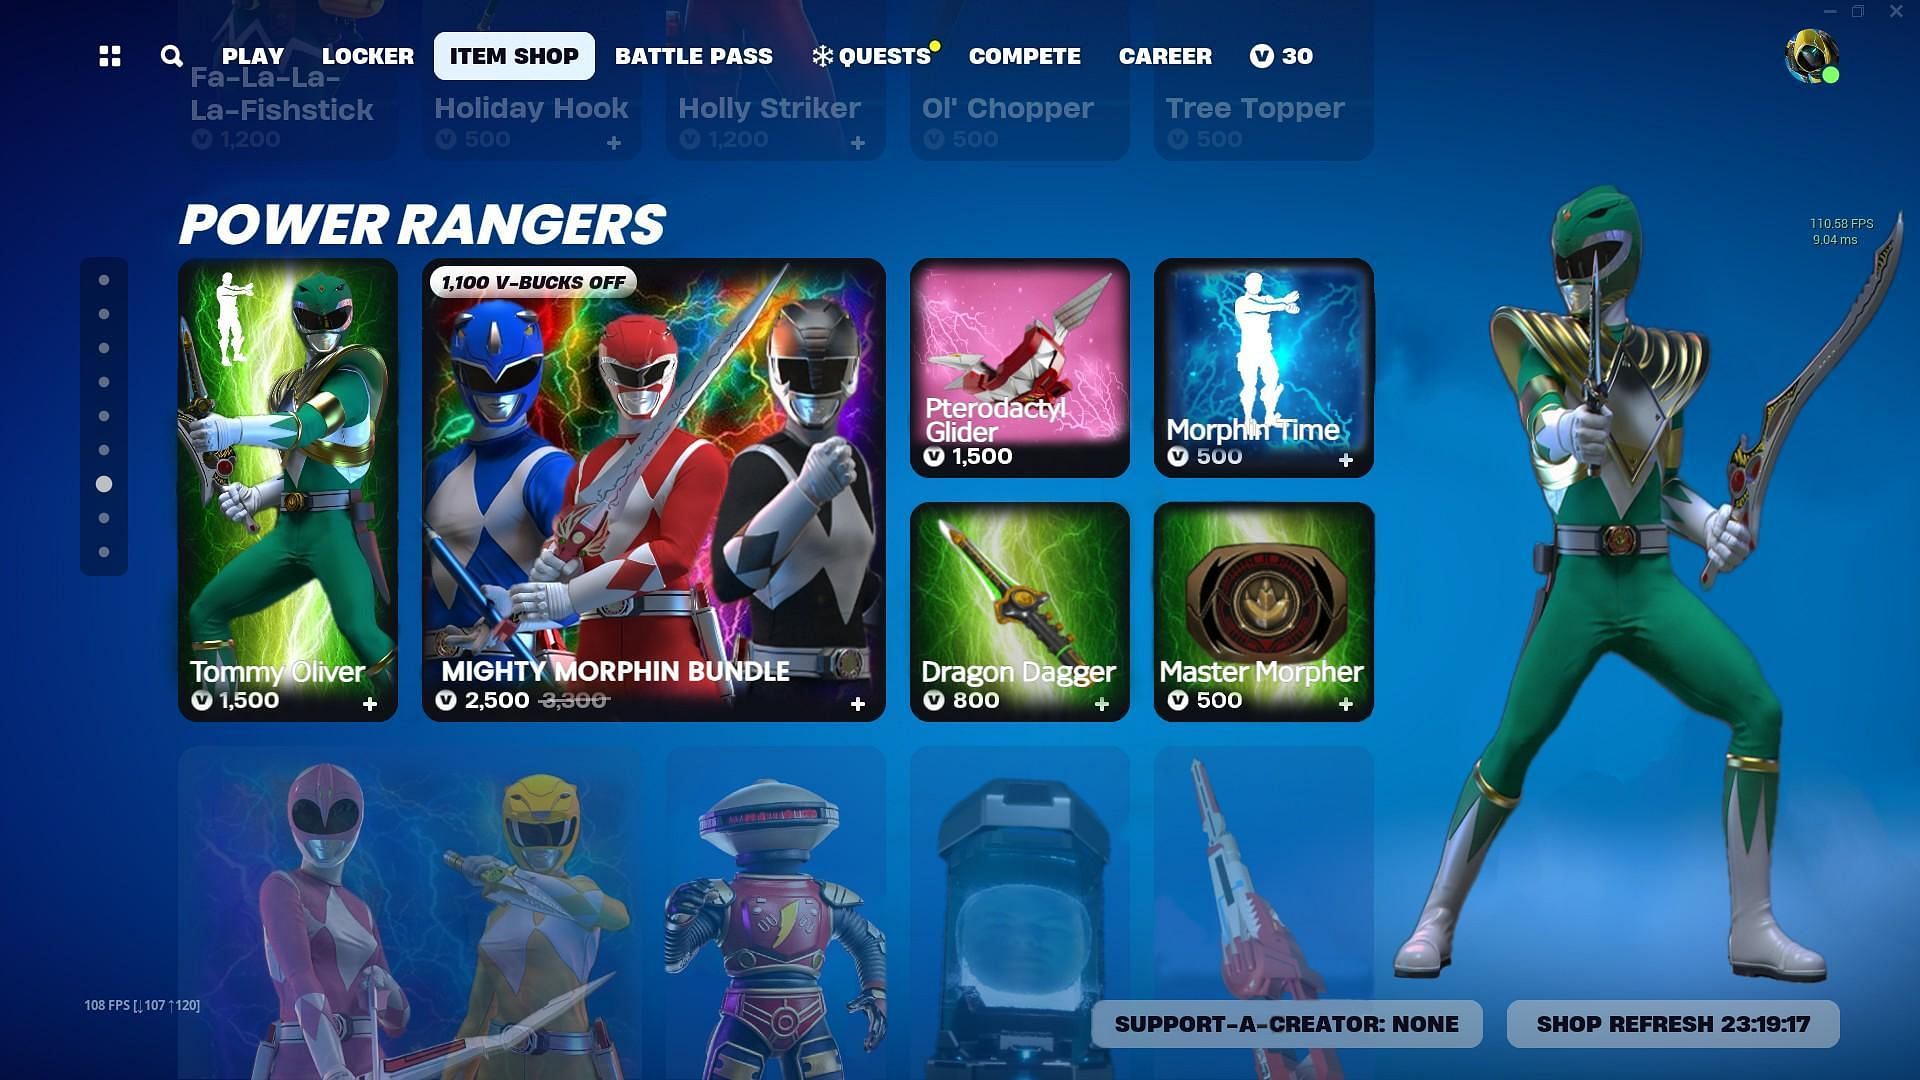 Fortnite x Power Rangers concept art takes the community by storm